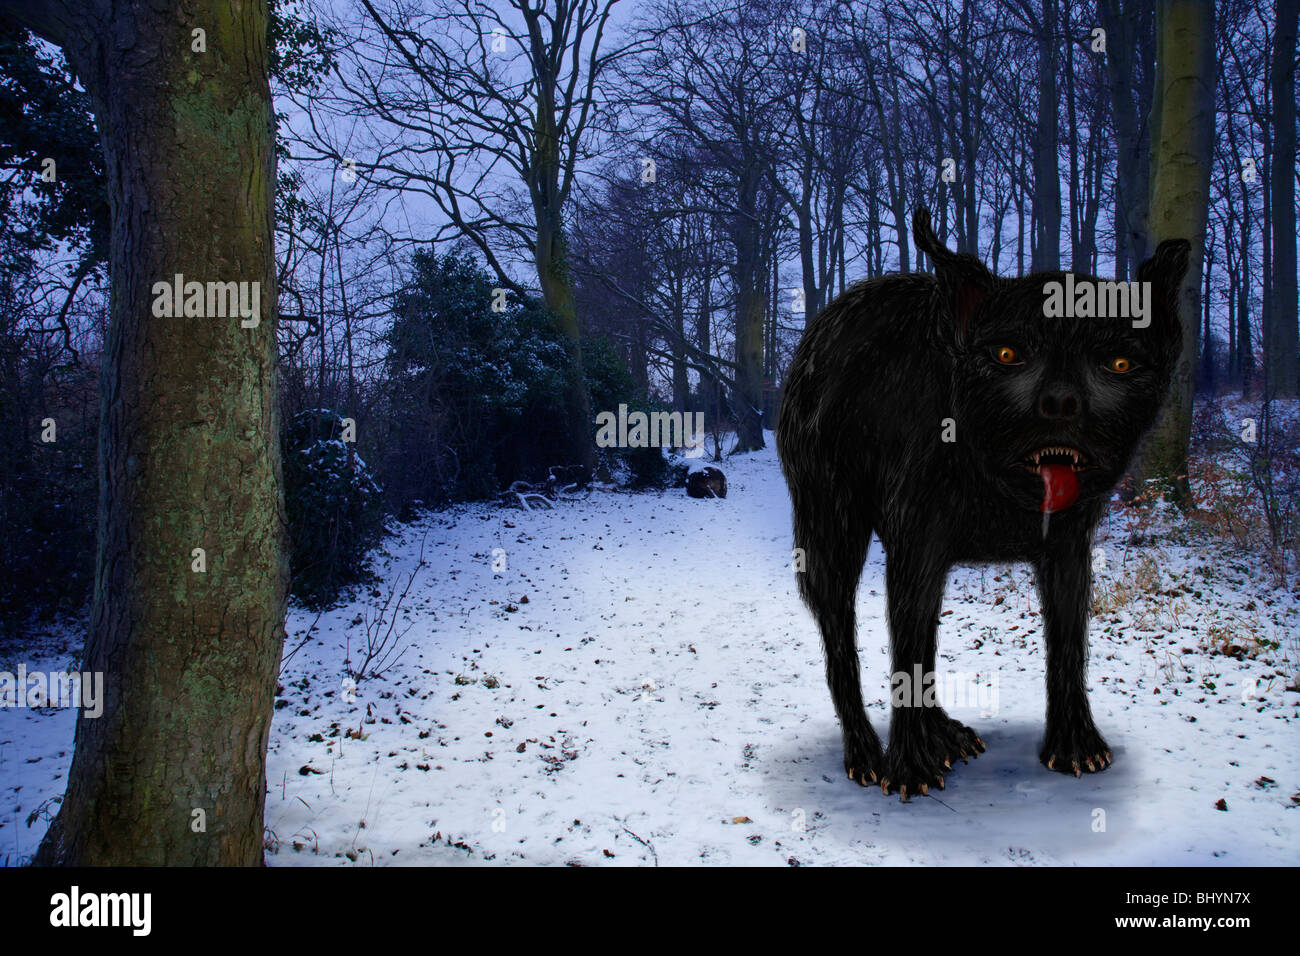 The 'East Anglian' mythical huge black dog, known as Black Shuck. Stock Photo